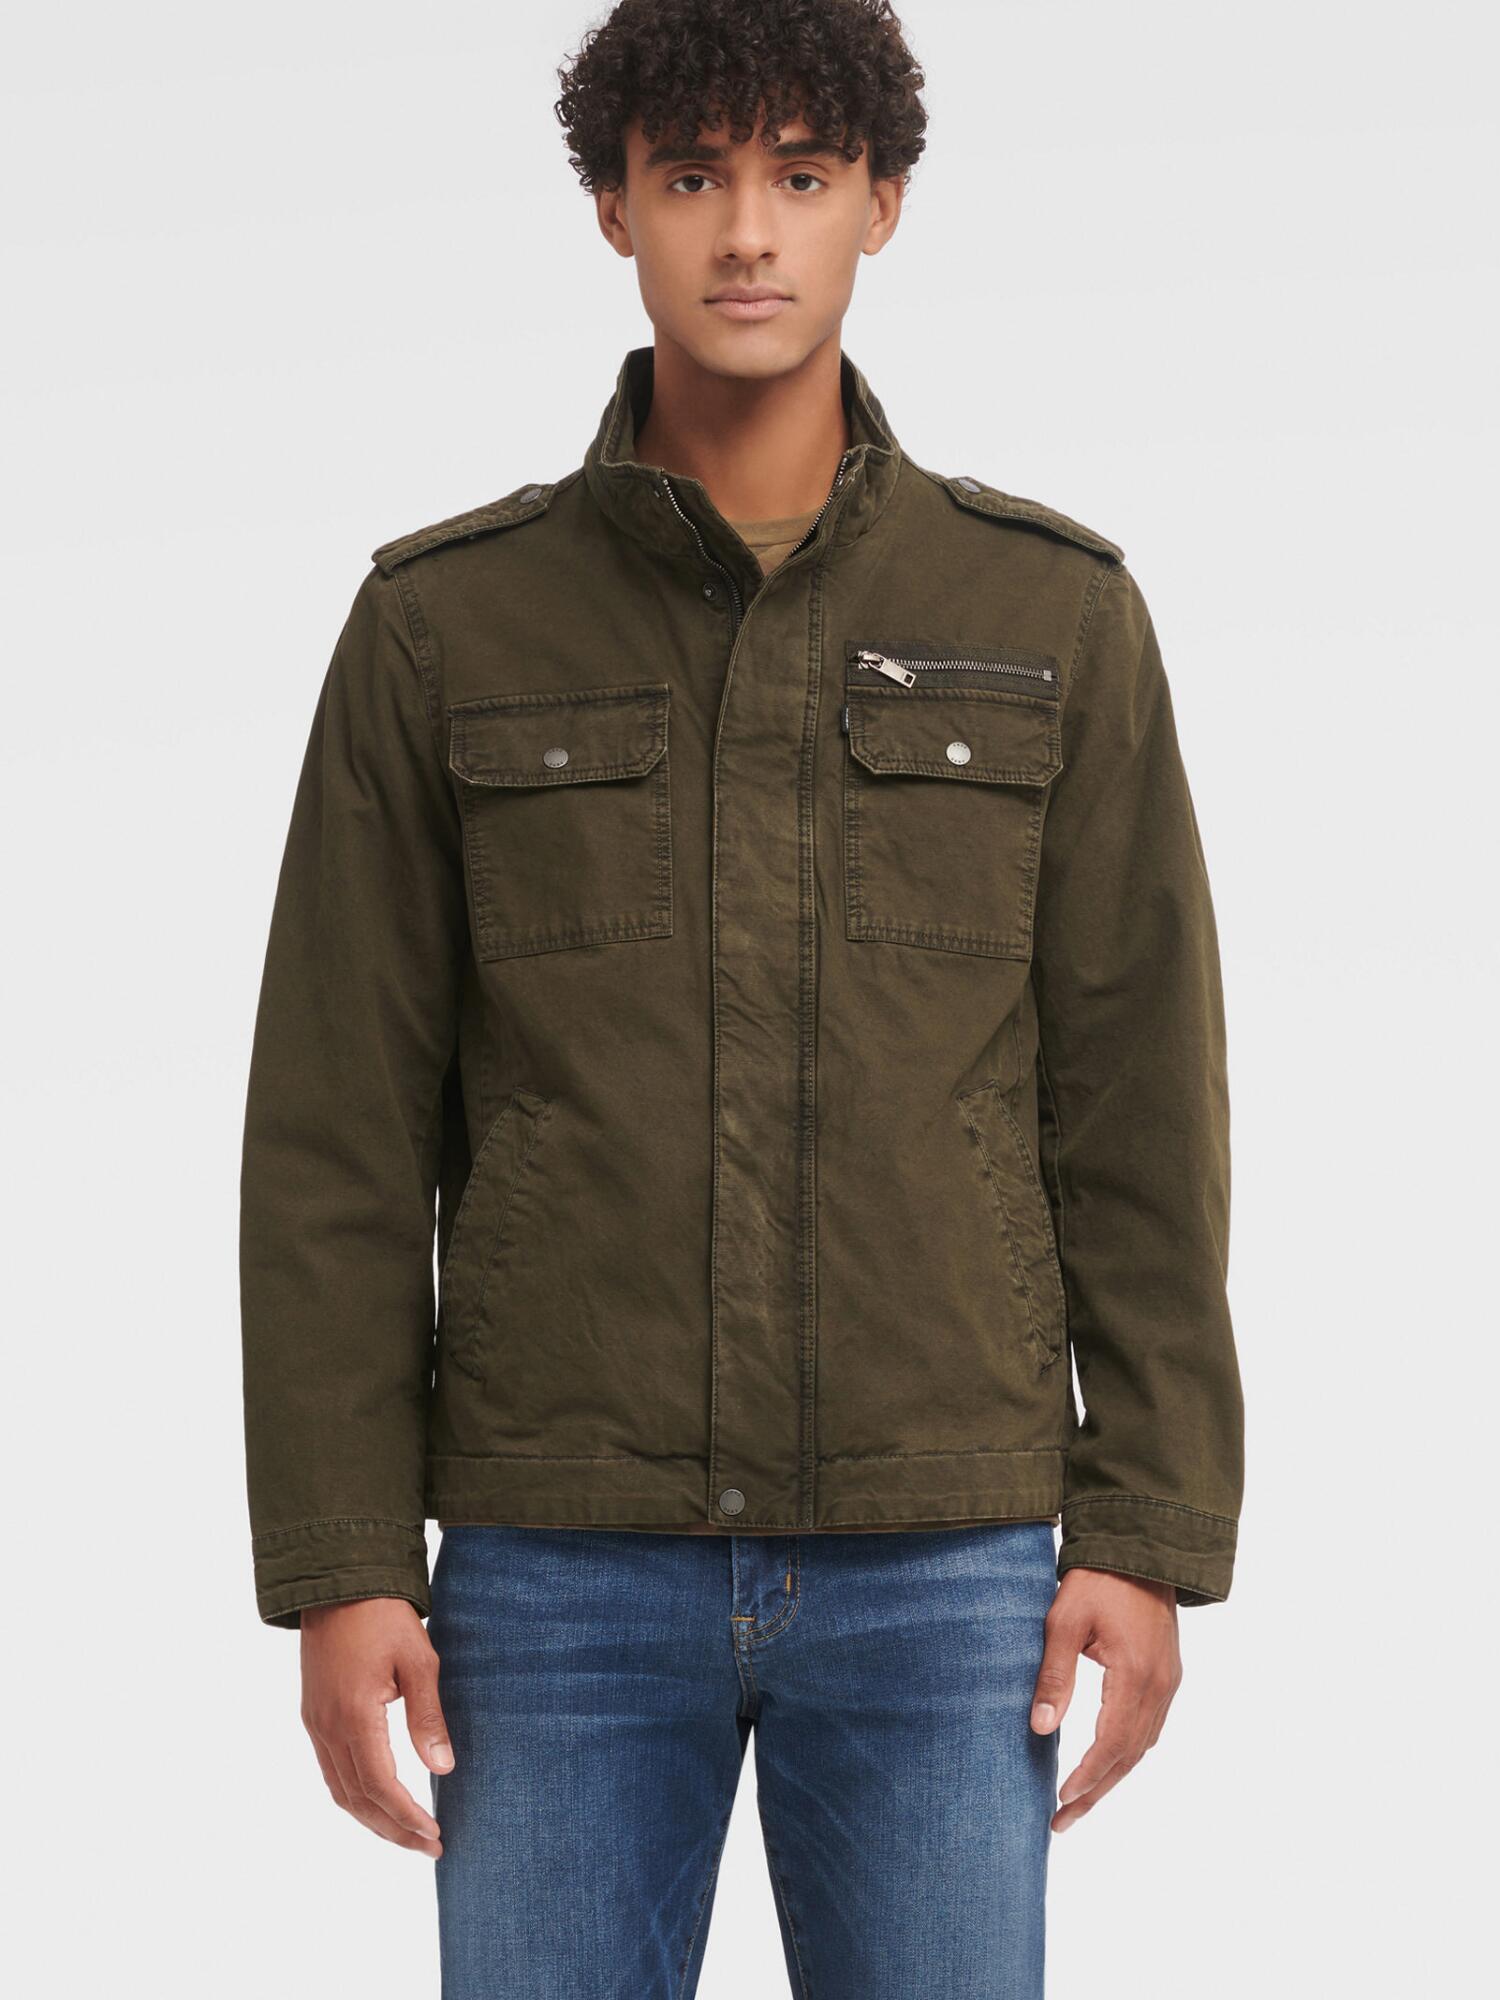 DKNY Military Field Jacket in Olive 